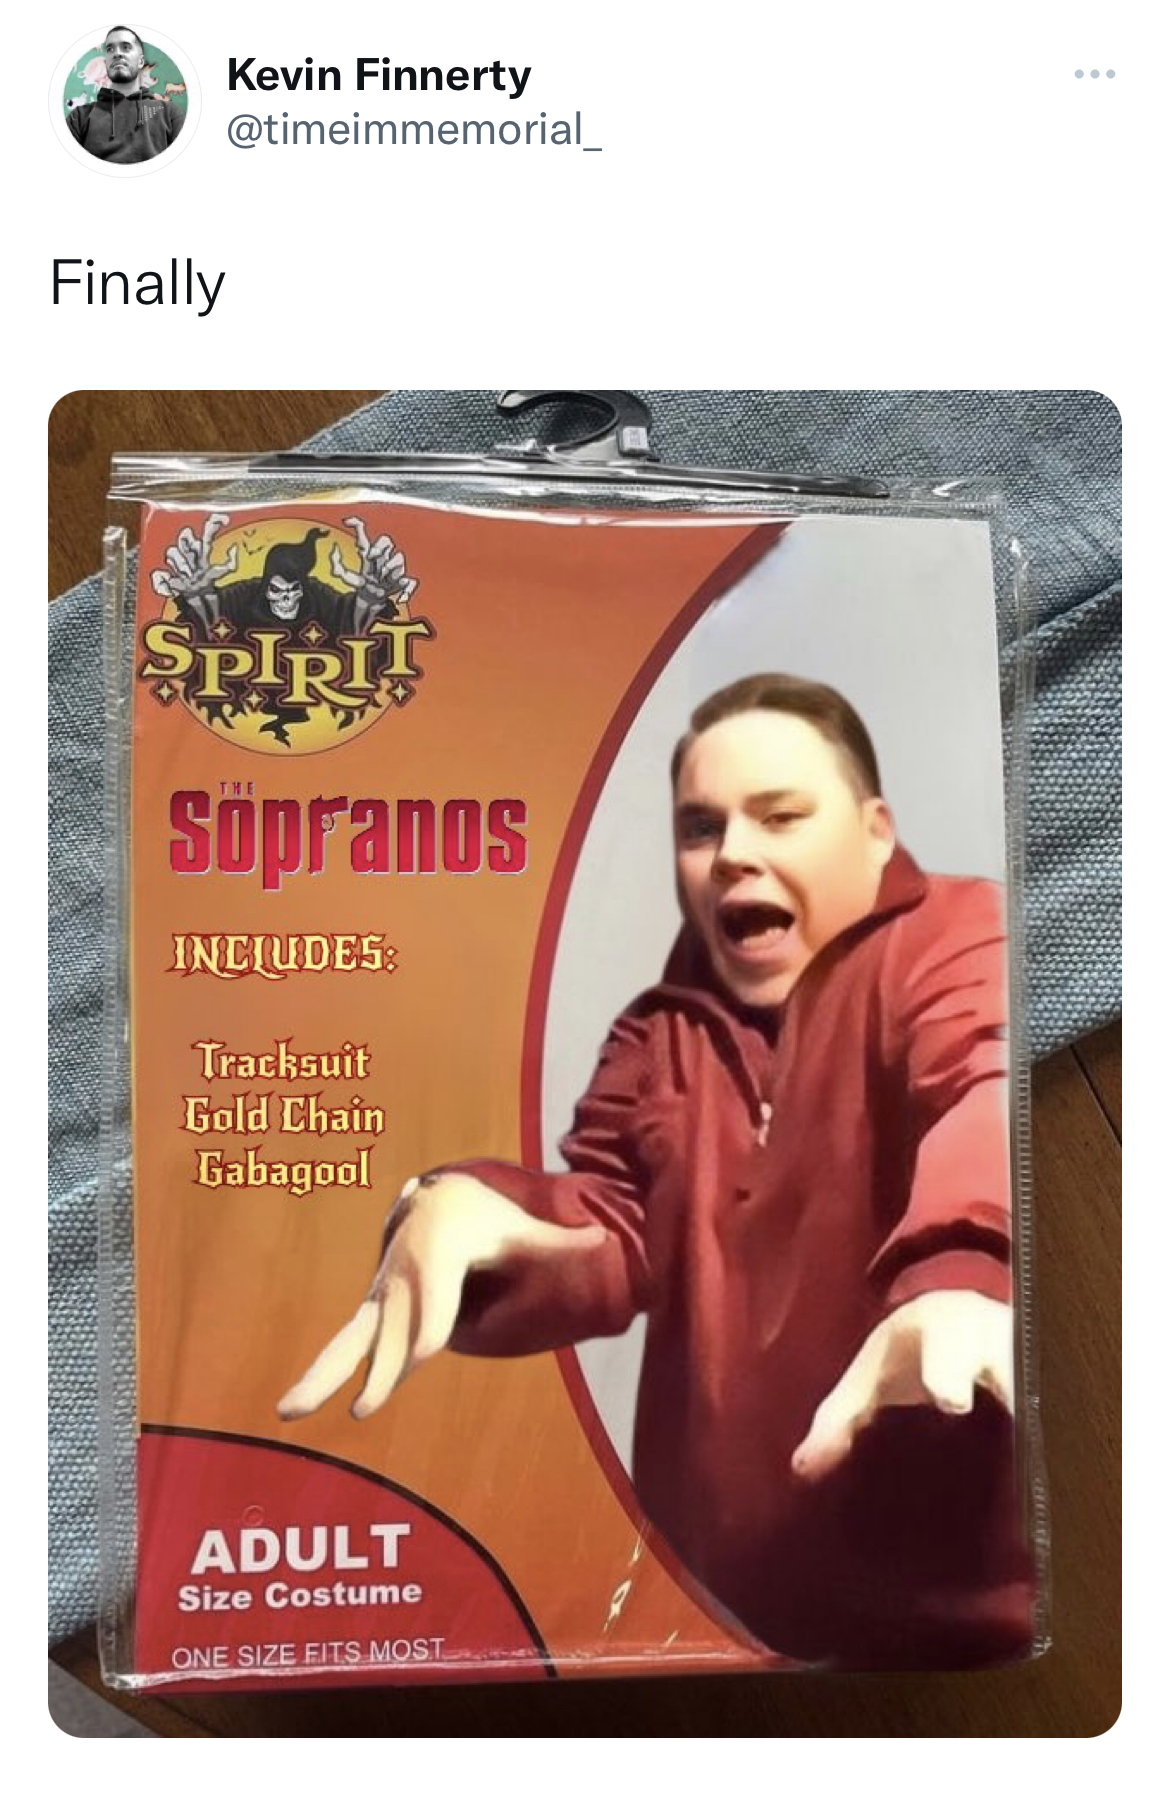 Costume Memes - spirit halloween - Kevin Finnerty Finally Spirit Sopranos Includes Tracksuit Gold Chain Gabagool Adult Size Costume One Size Fits Most